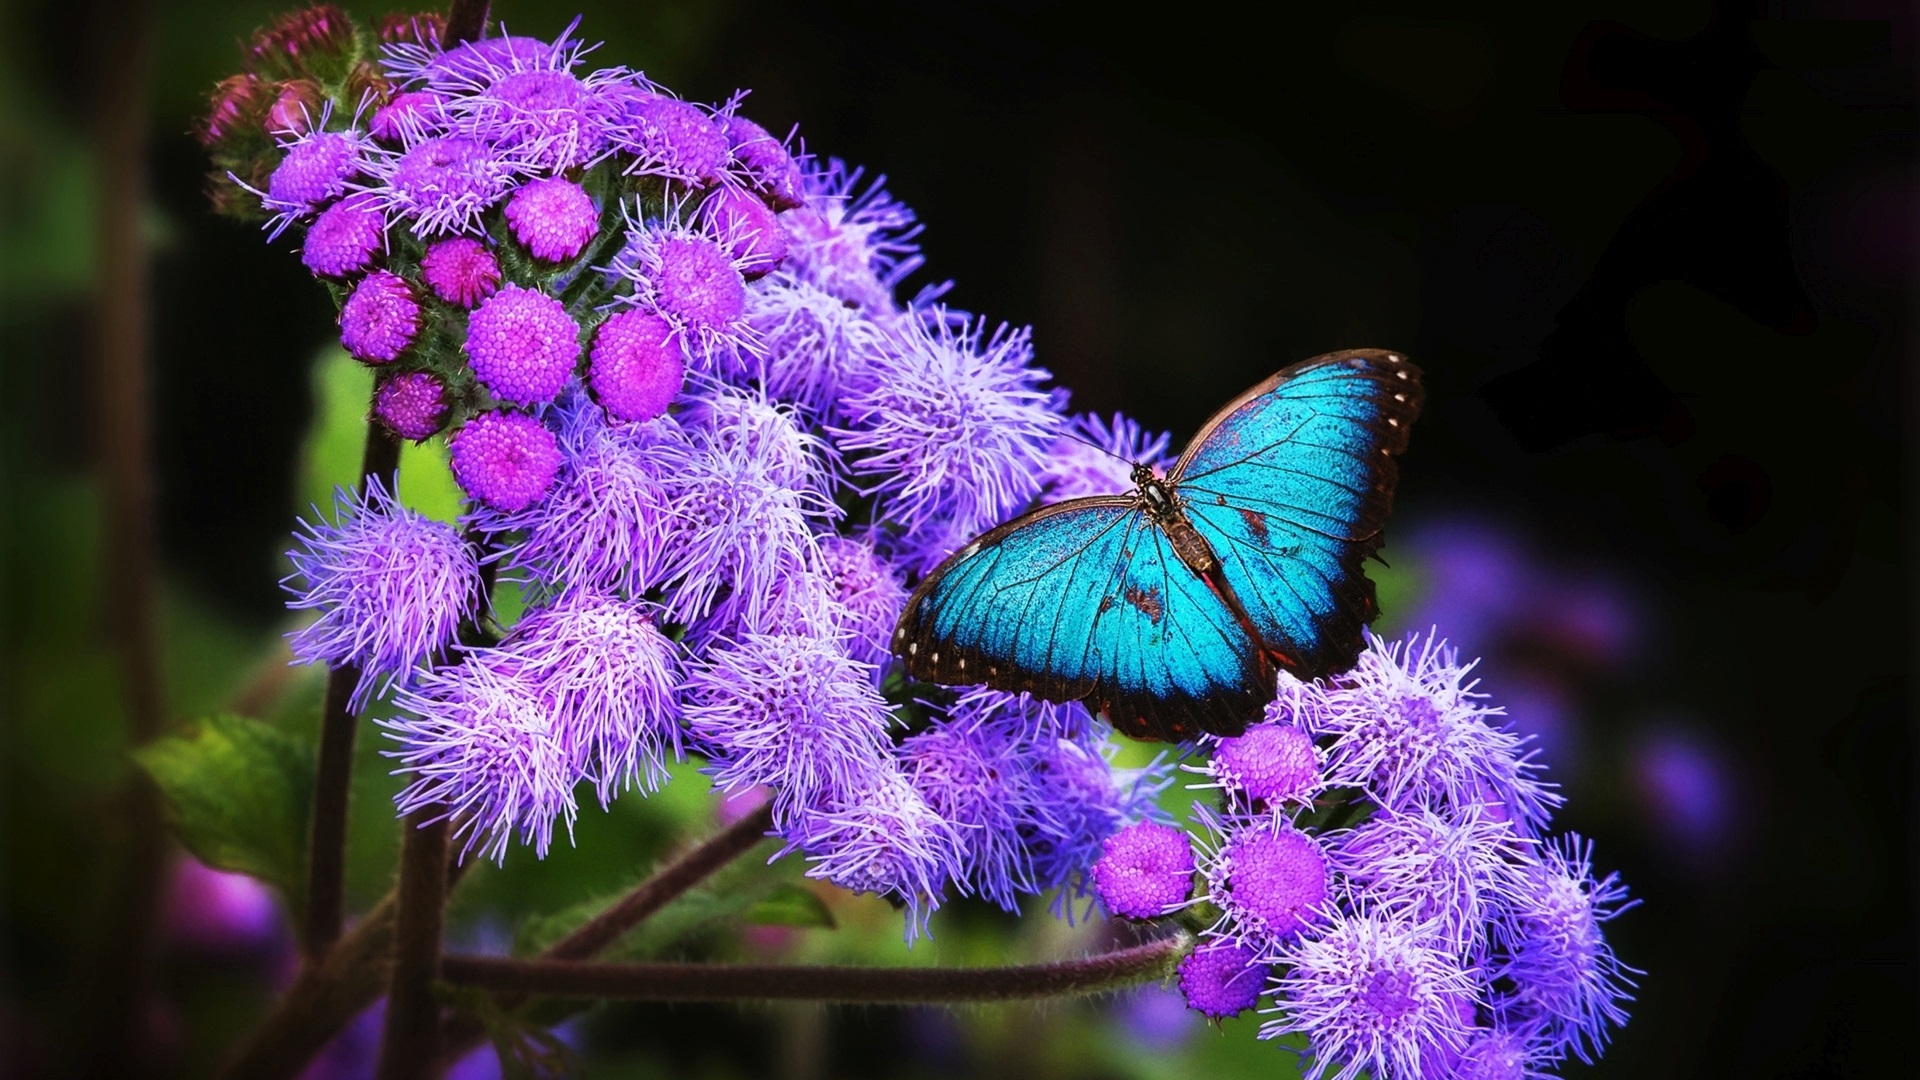 flowers and butterflies wallpaper,butterfly,insect,blue,purple,pollinator